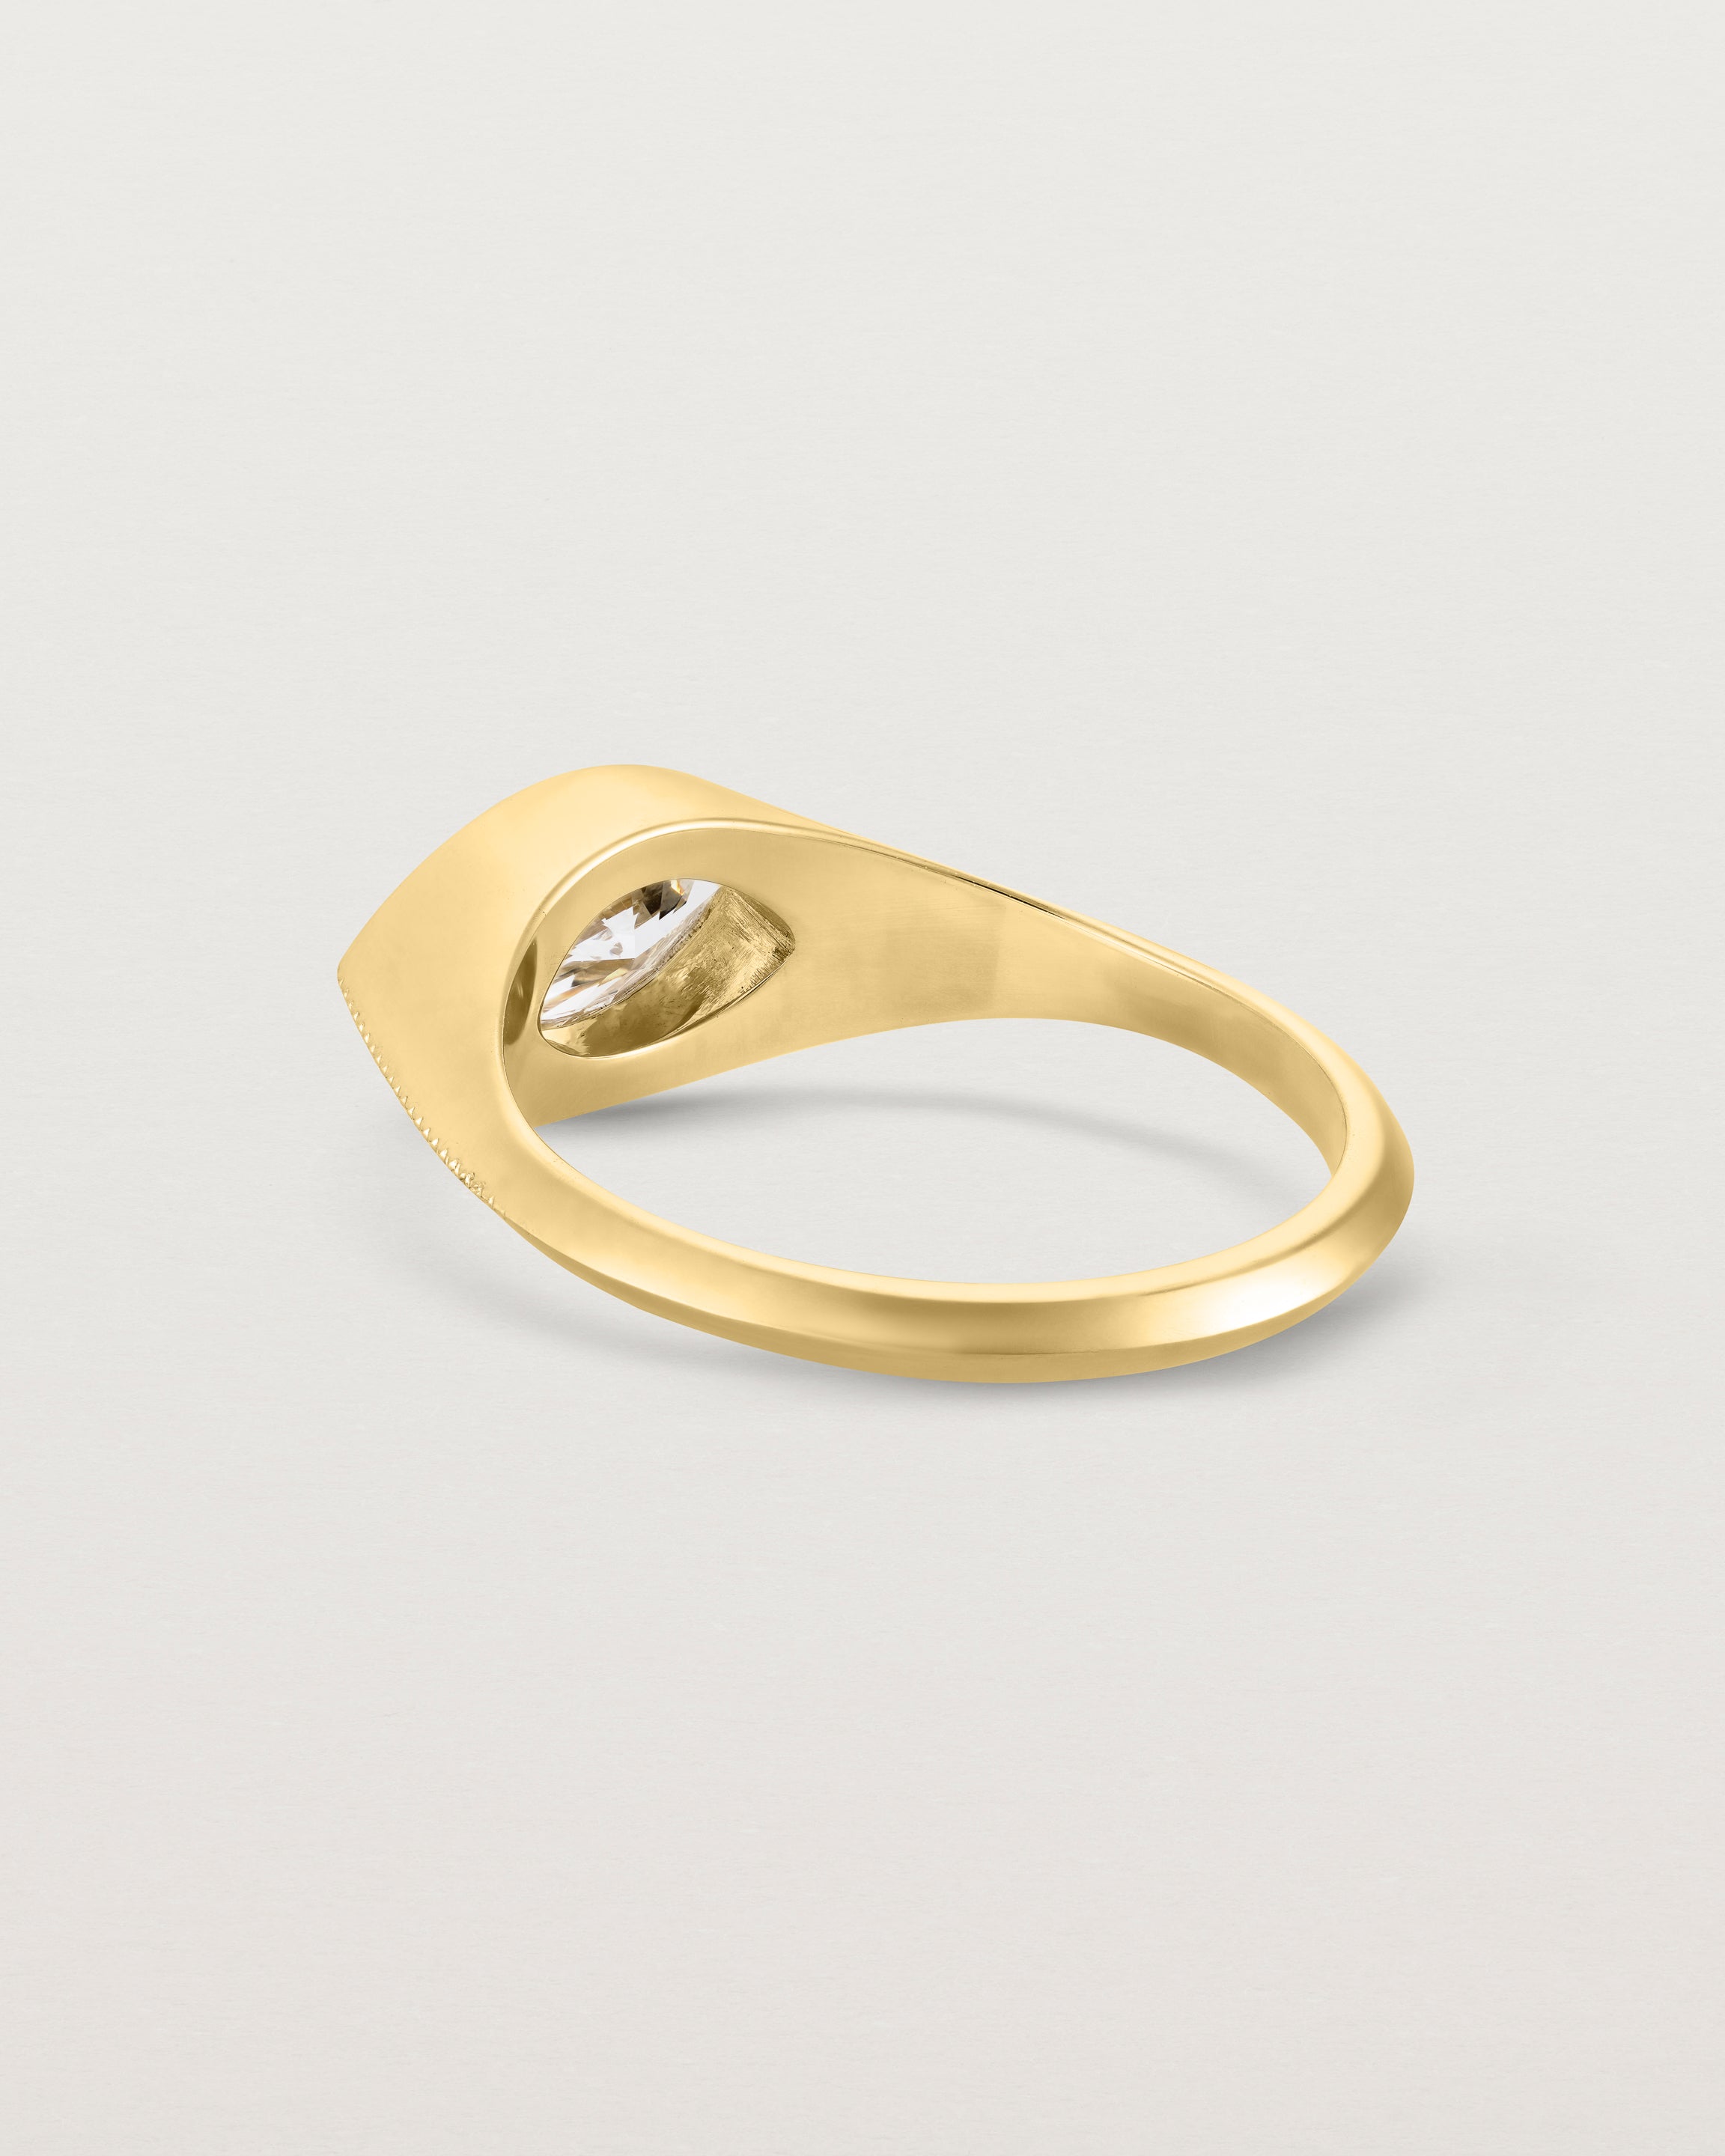 Back view of the Átlas Marquise Signet | Laboratory Grown Diamond in yellow gold, in a polished finish.